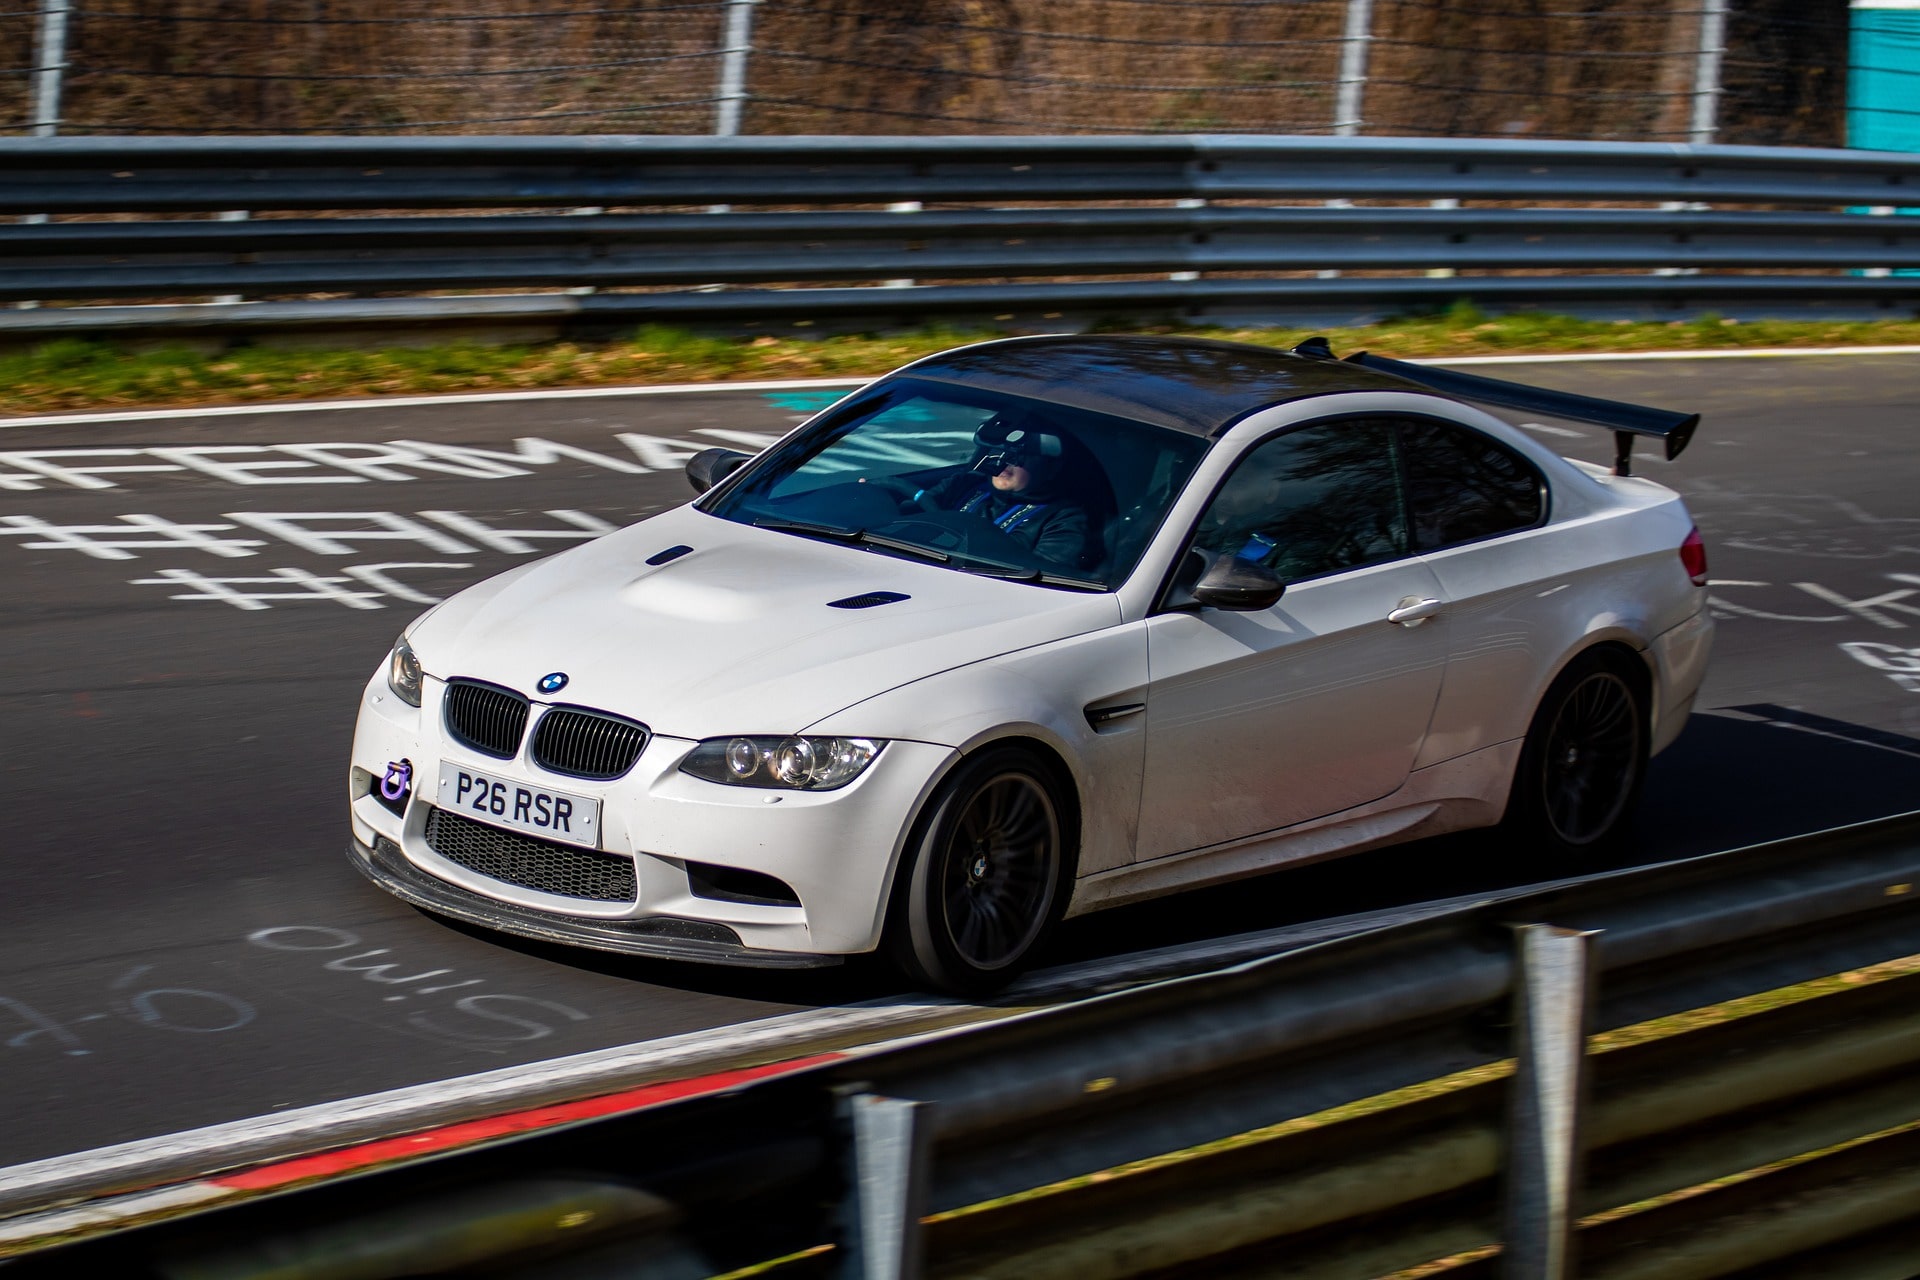 Should you buy High Mileage Bmw E92 M3 in 2023 ? (153,500 Miles!) 